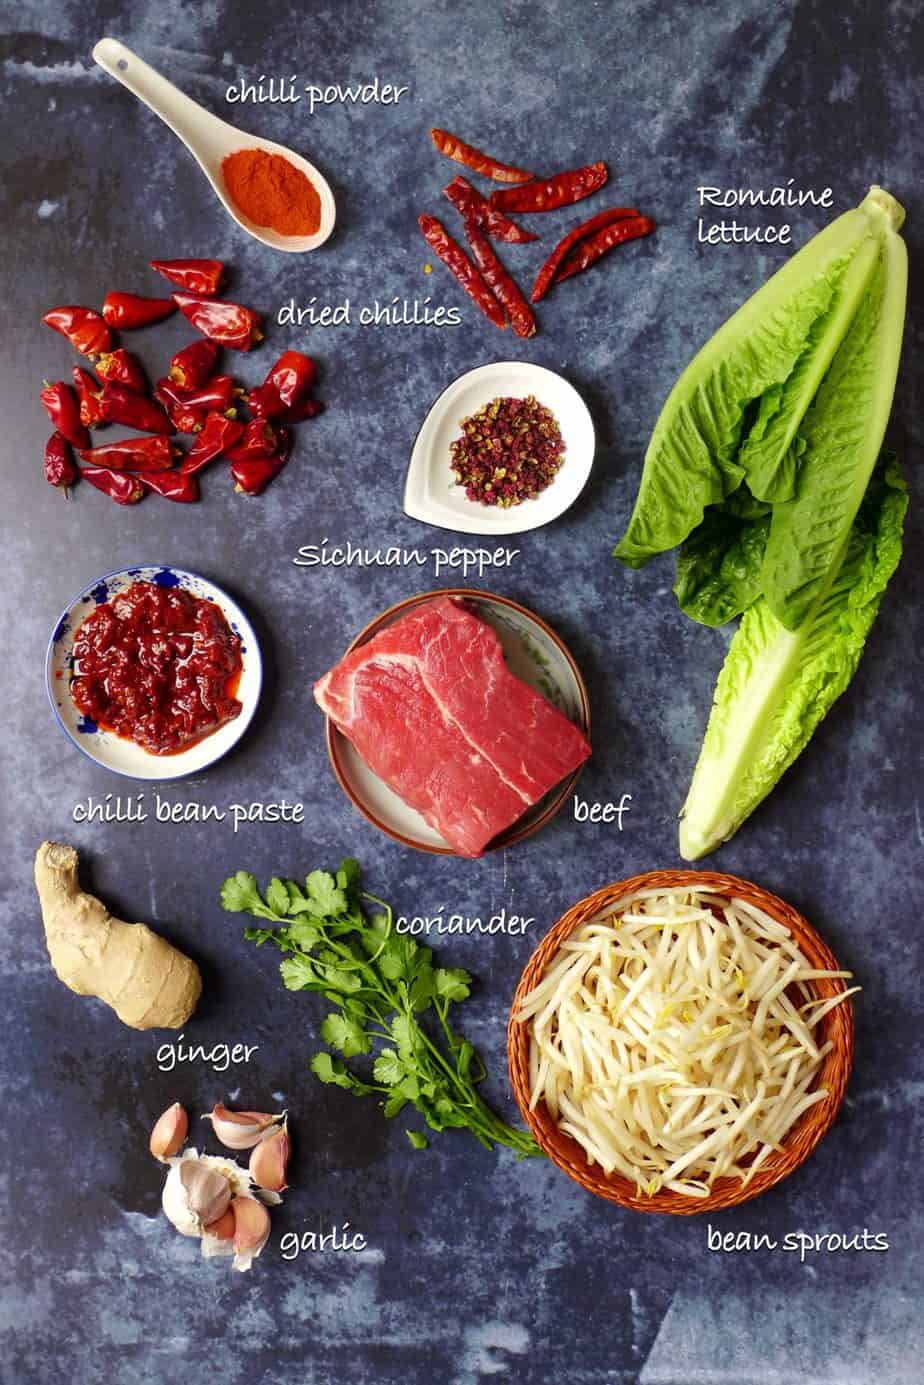 A group of ingredients for making Sichuan boiled beef.